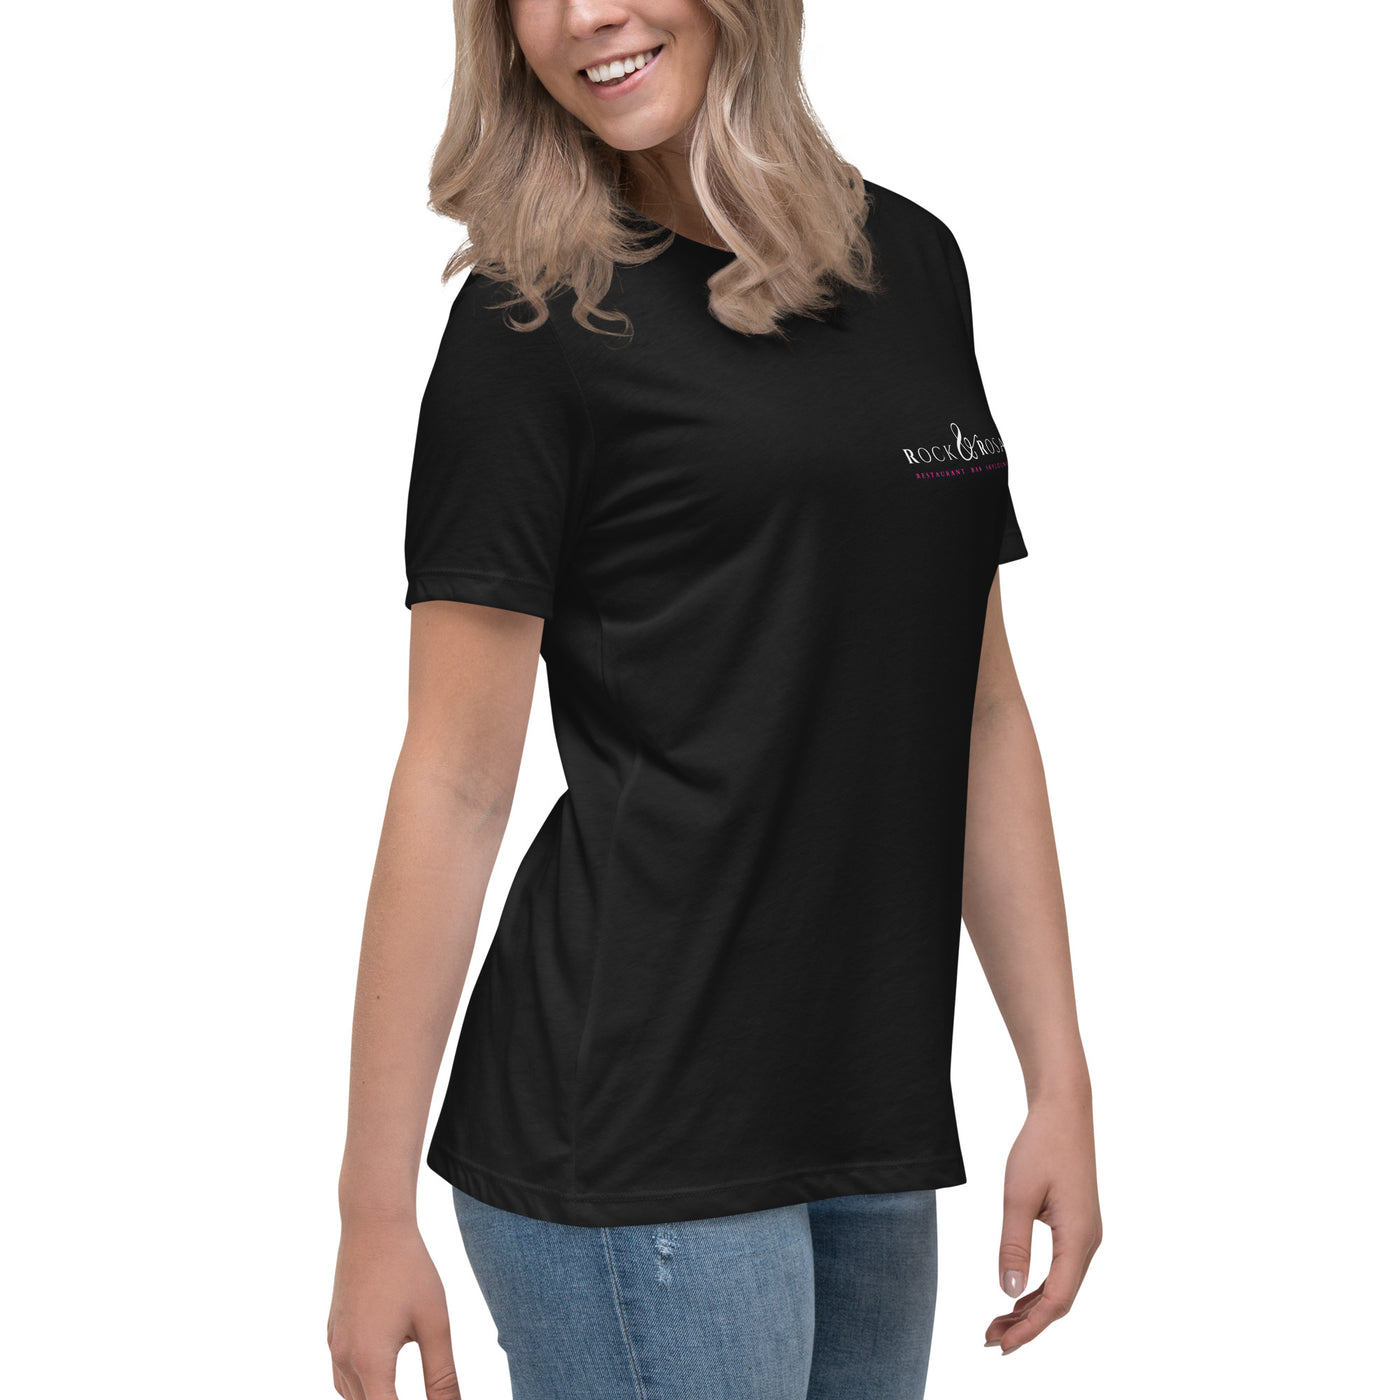 Get trendy with Women's Relaxed T-Shirt -  available at SWCH Store. Grab yours for £14.50 today!